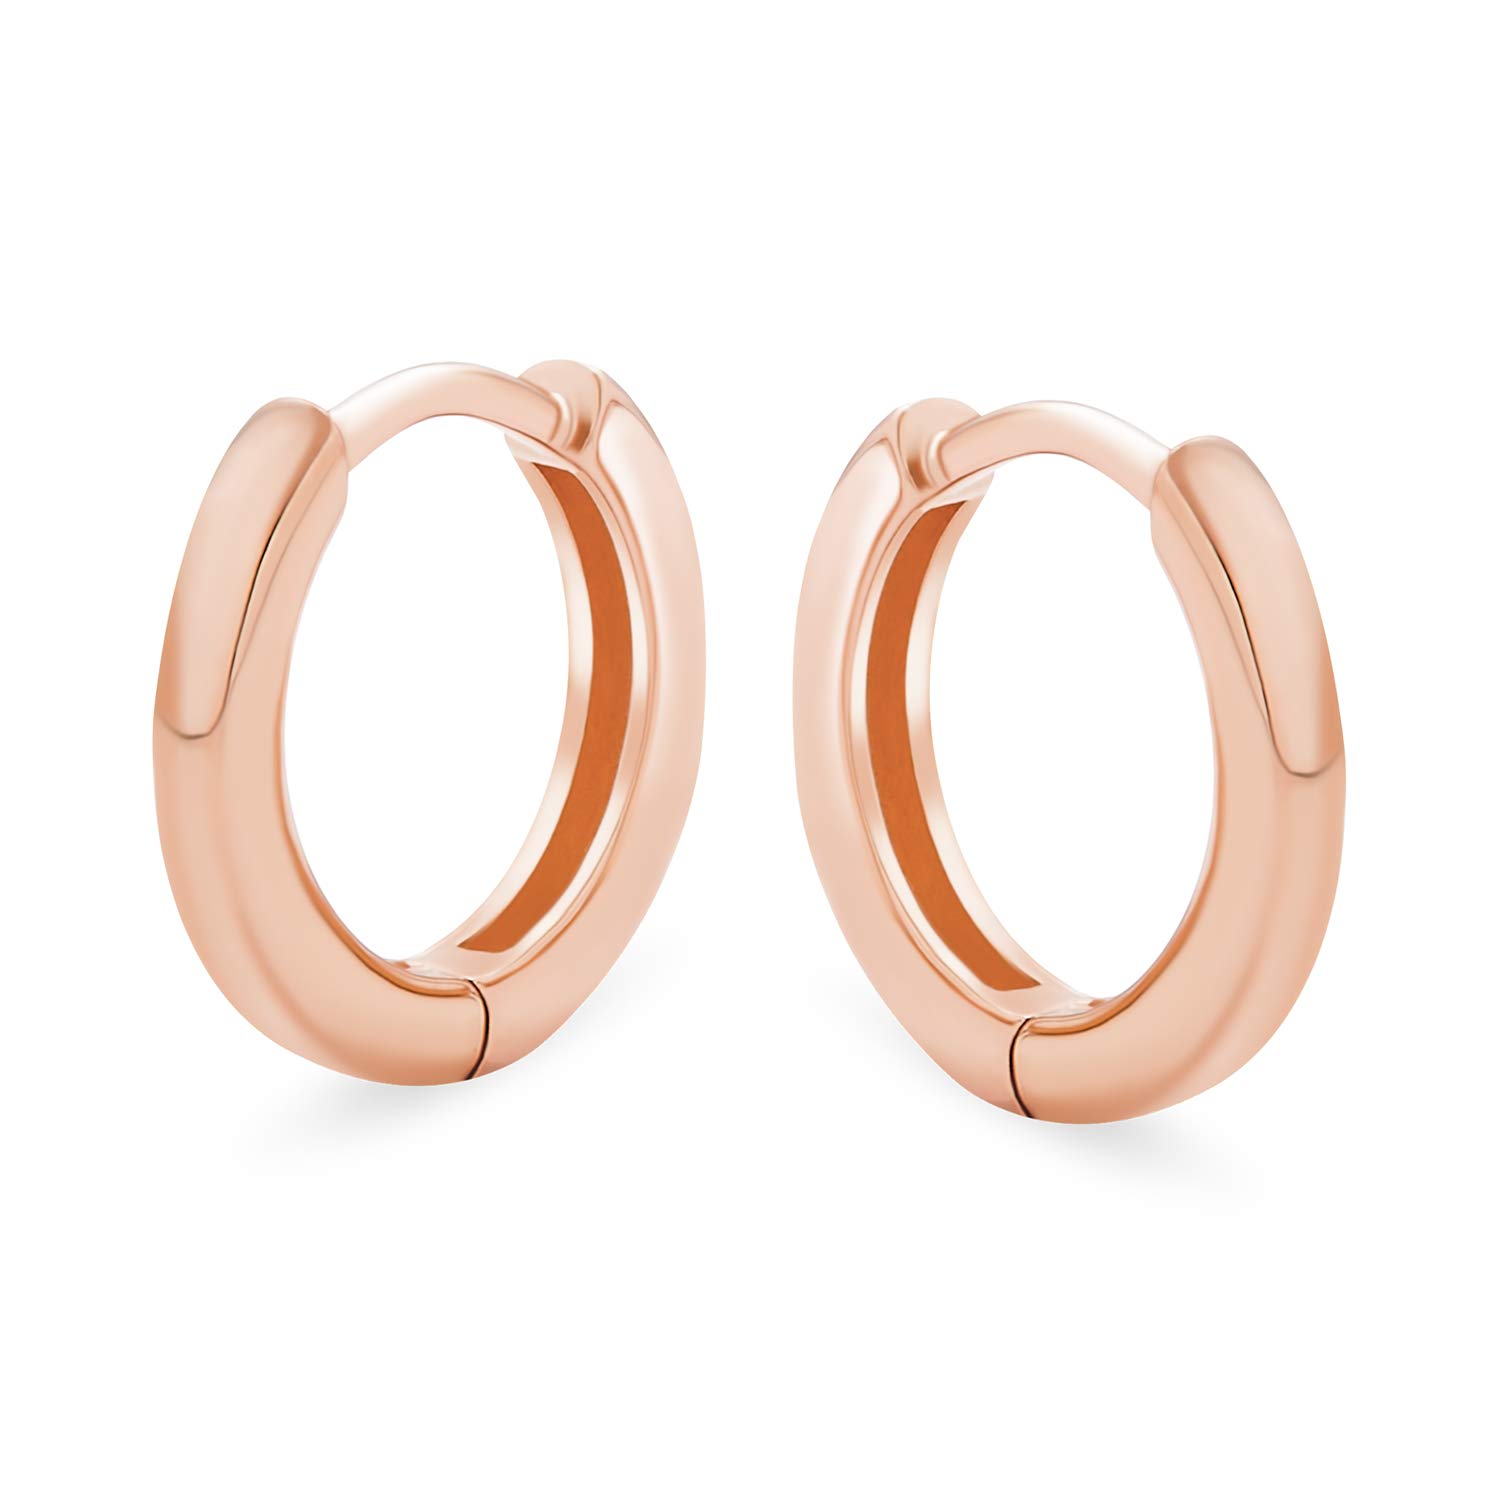 Basic Simple Thin Huggie Hoop Kpop Earrings For Women For Men Rose Gold Plated 925 Sterling Silver Polished Flat Hinge